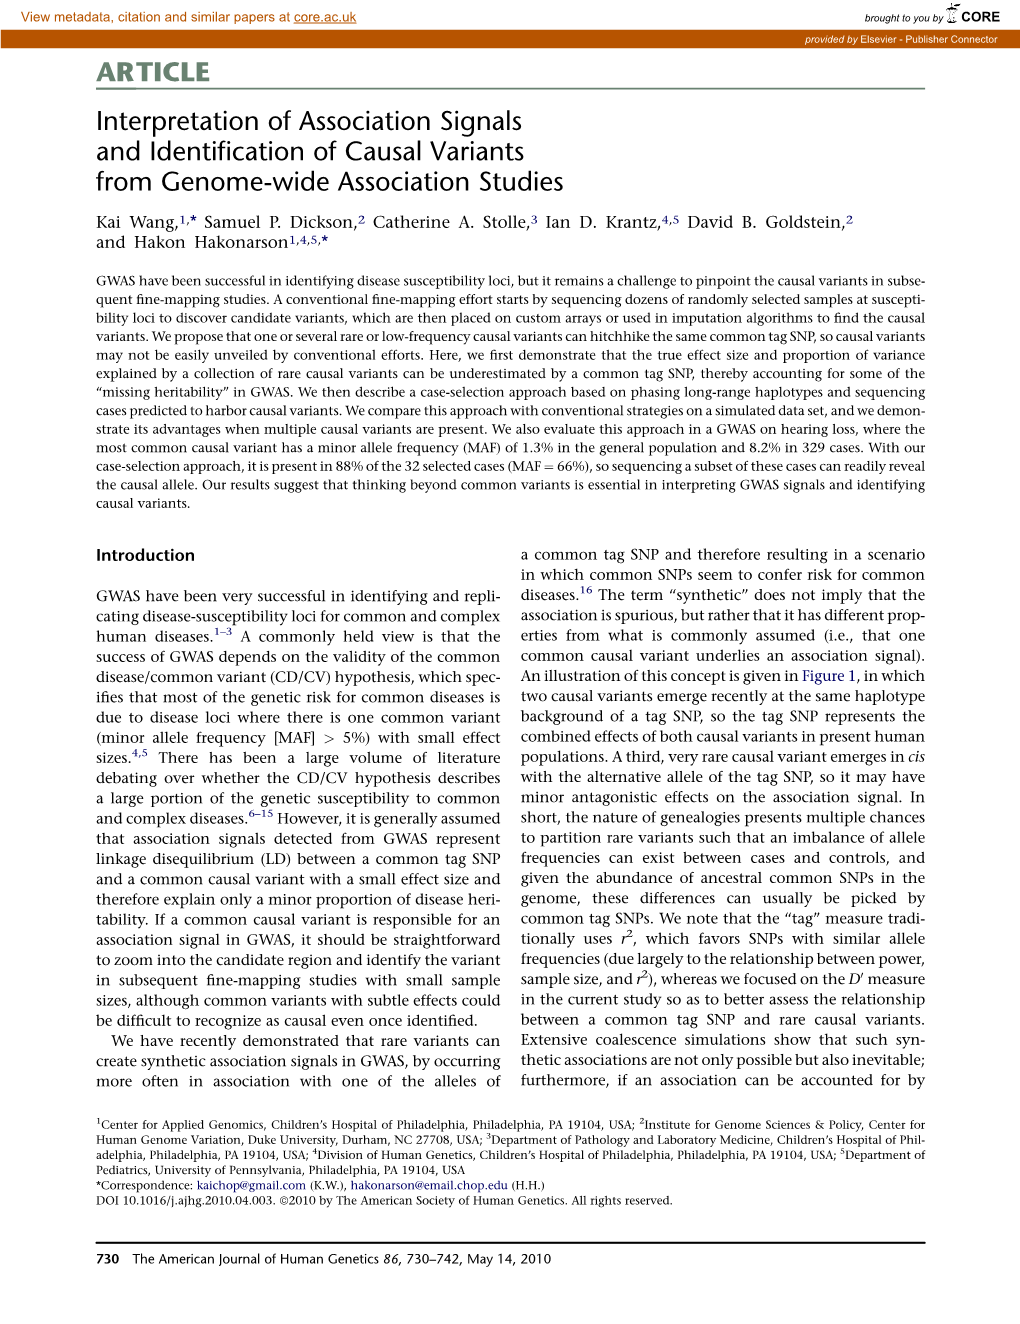 Interpretation of Association Signals and Identification of Causal Variants from Genome-Wide Association Studies